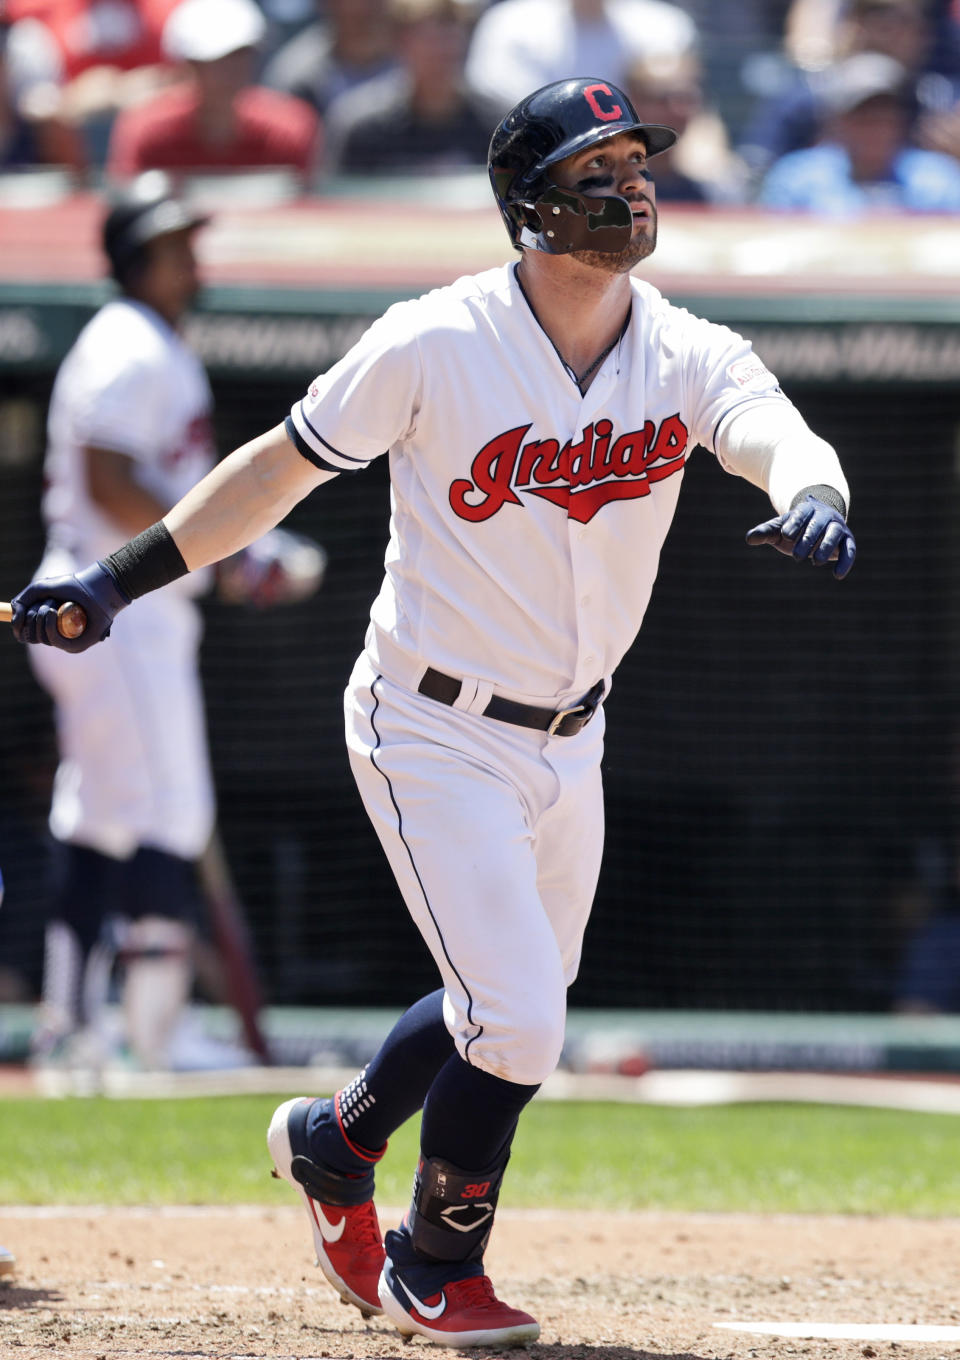 Cleveland Indians' Tyler Naquin watches his ball after hitting a solo home run in the fourth inning in a baseball game against the Kansas City Royals Wednesday, June 26, 2019, in Cleveland. (AP Photo/Tony Dejak)